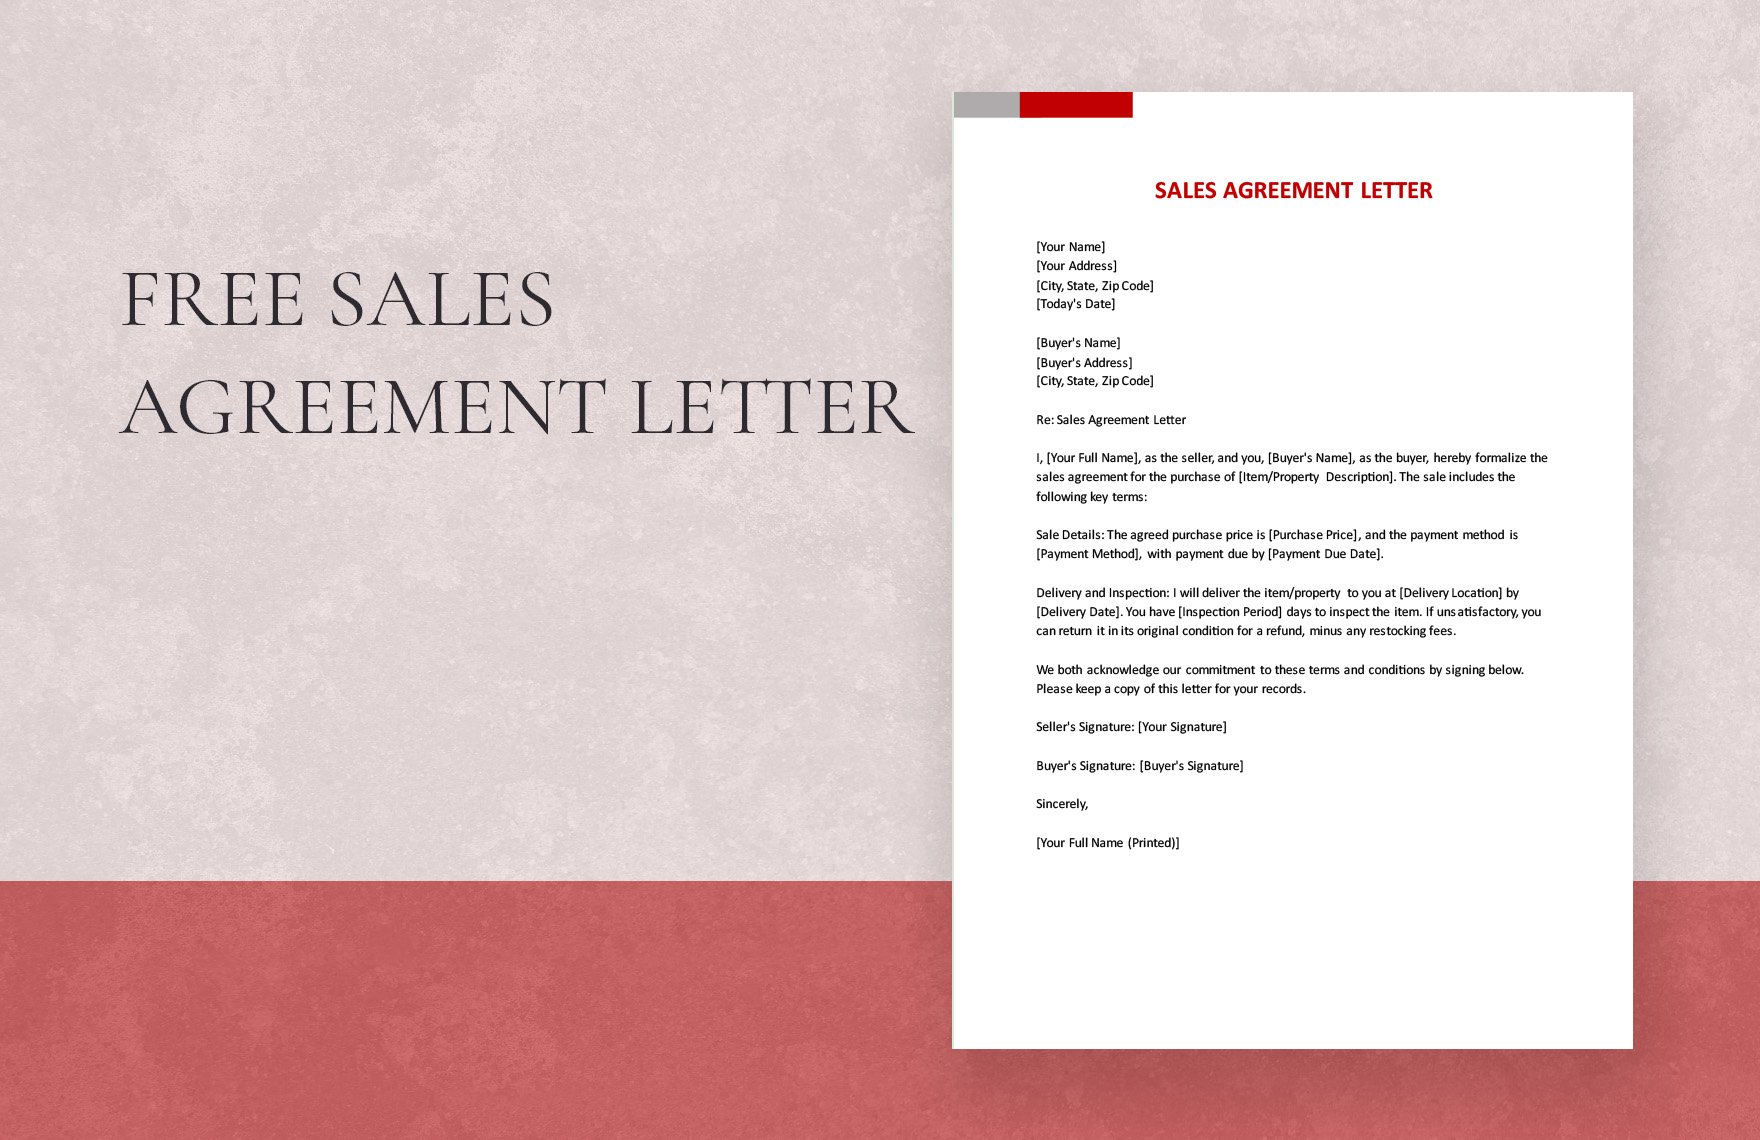 Sales Agreement Letter in Word, Google Docs, PDF